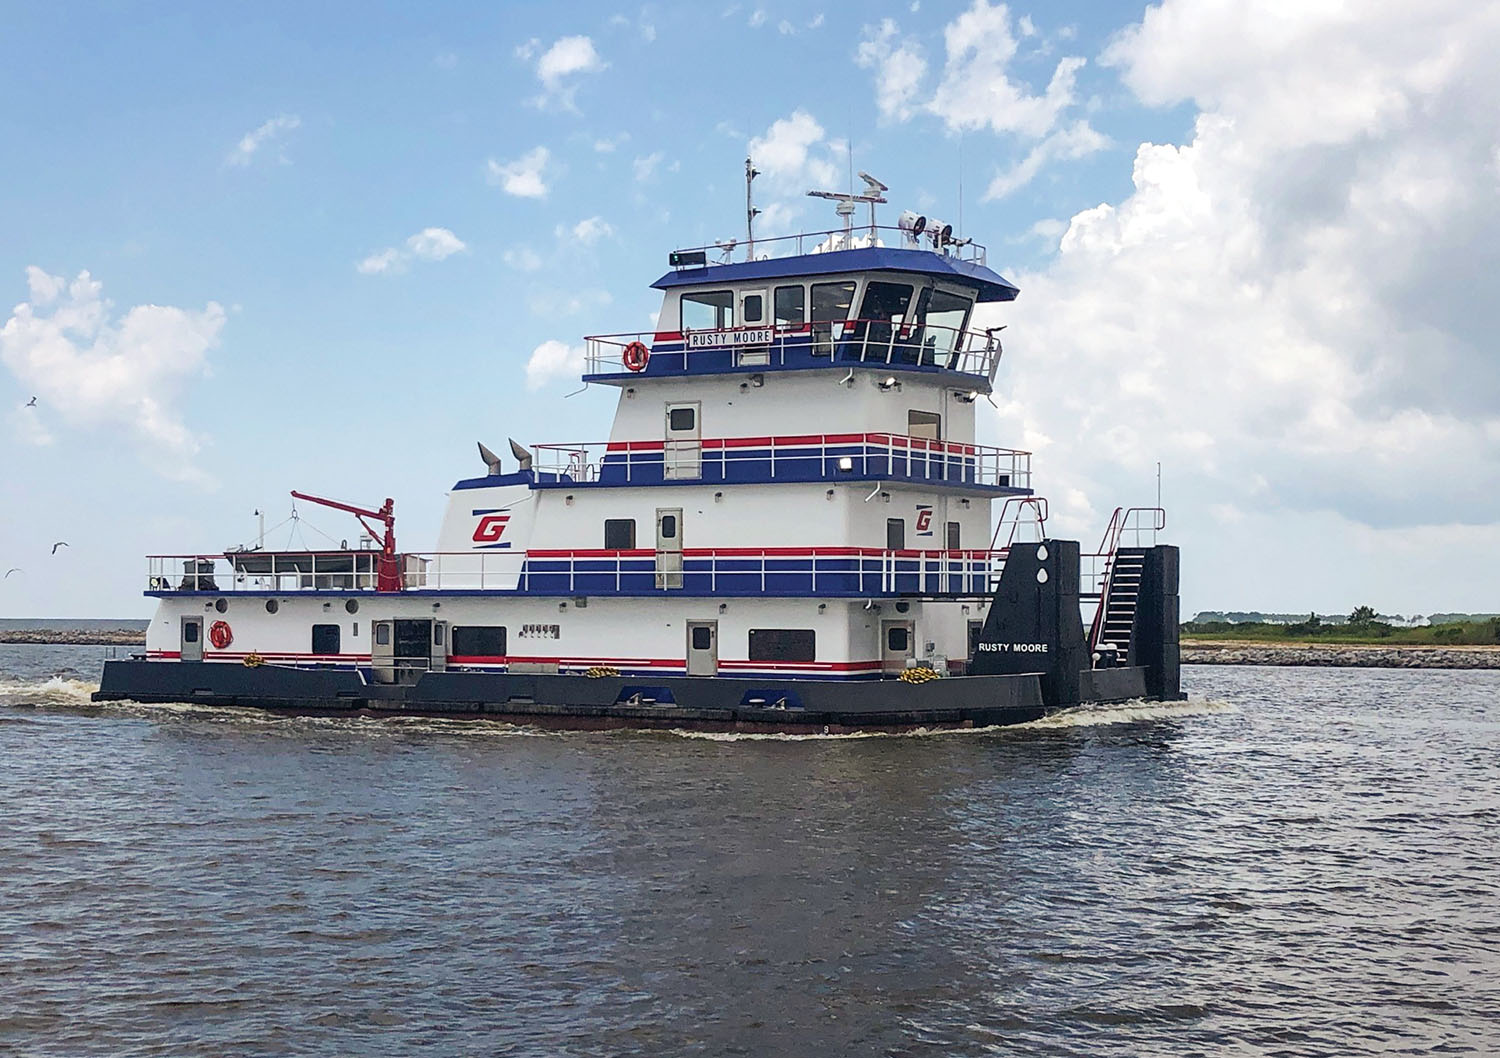 The 2,400 hp. mv. Rusty Moore was constructed by Master Boat Builders in Coden, Ala.